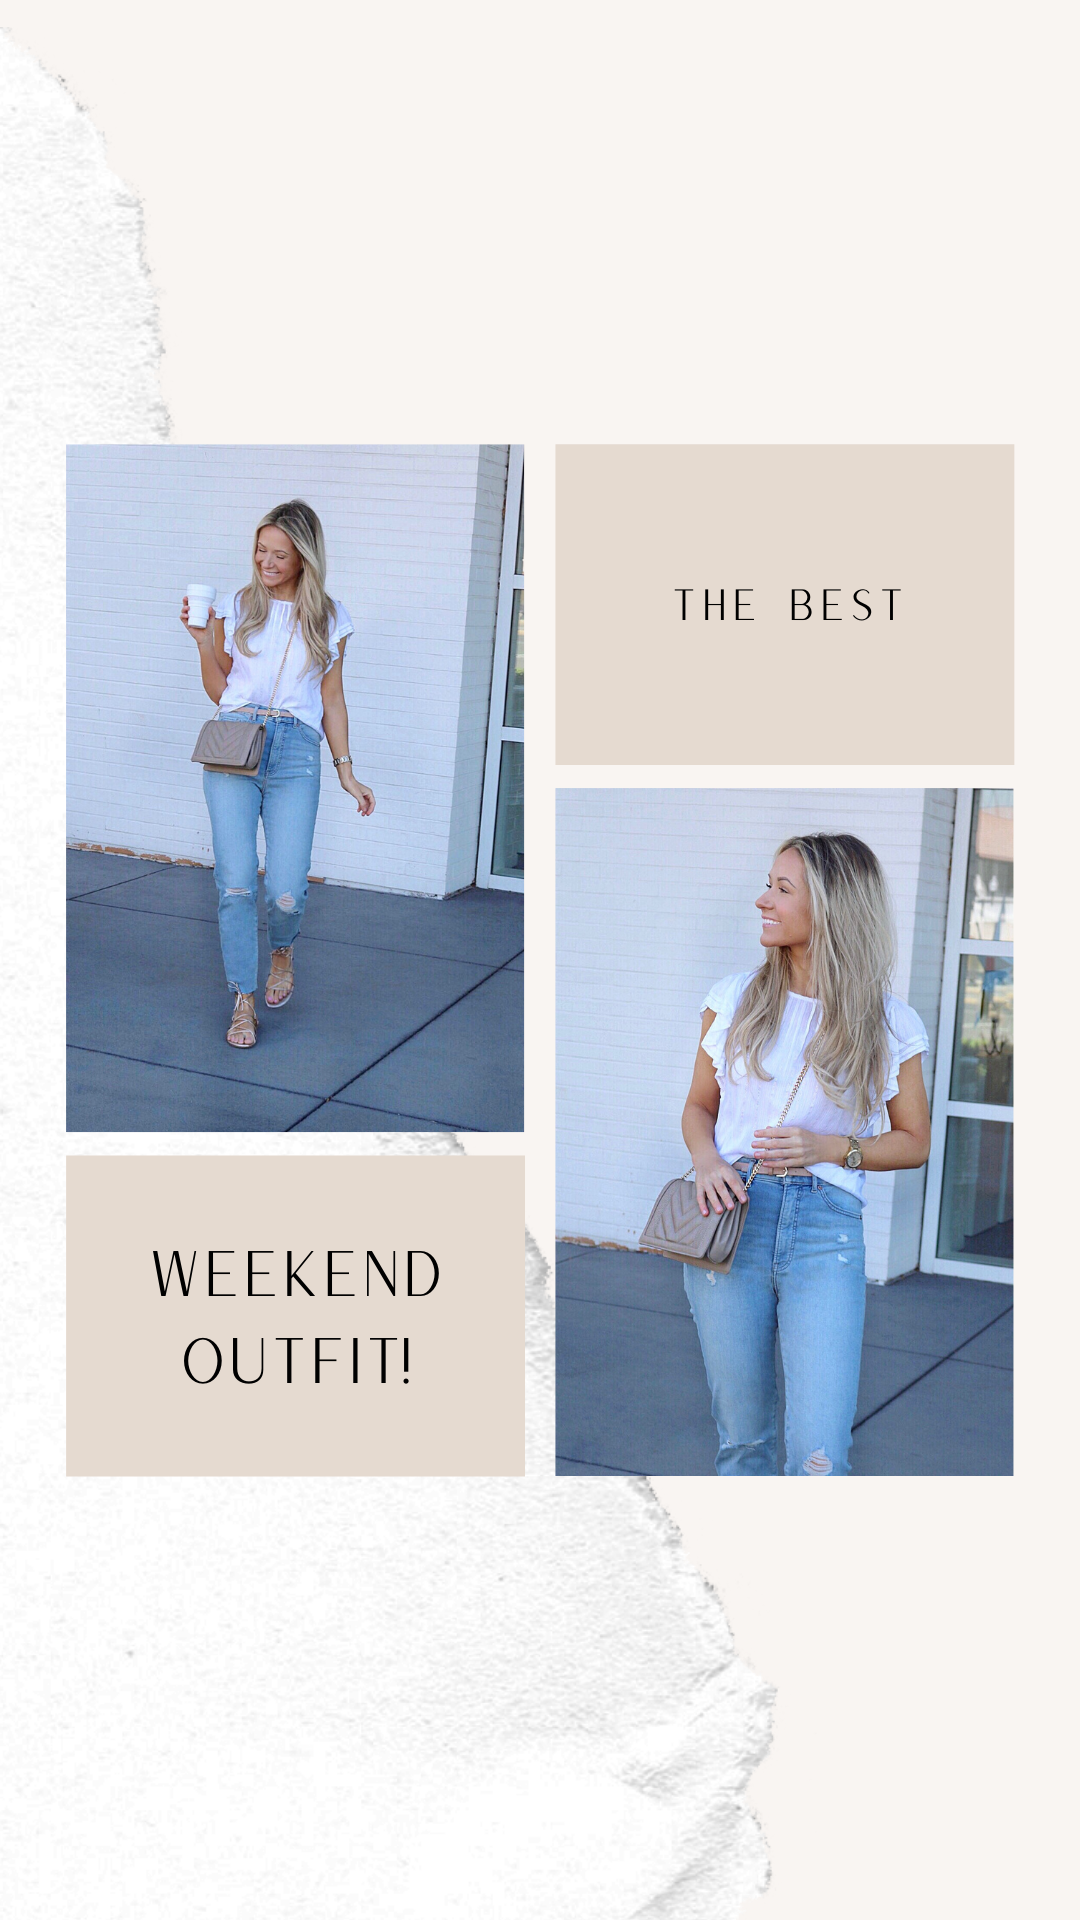 The Best Weekend Outfit!